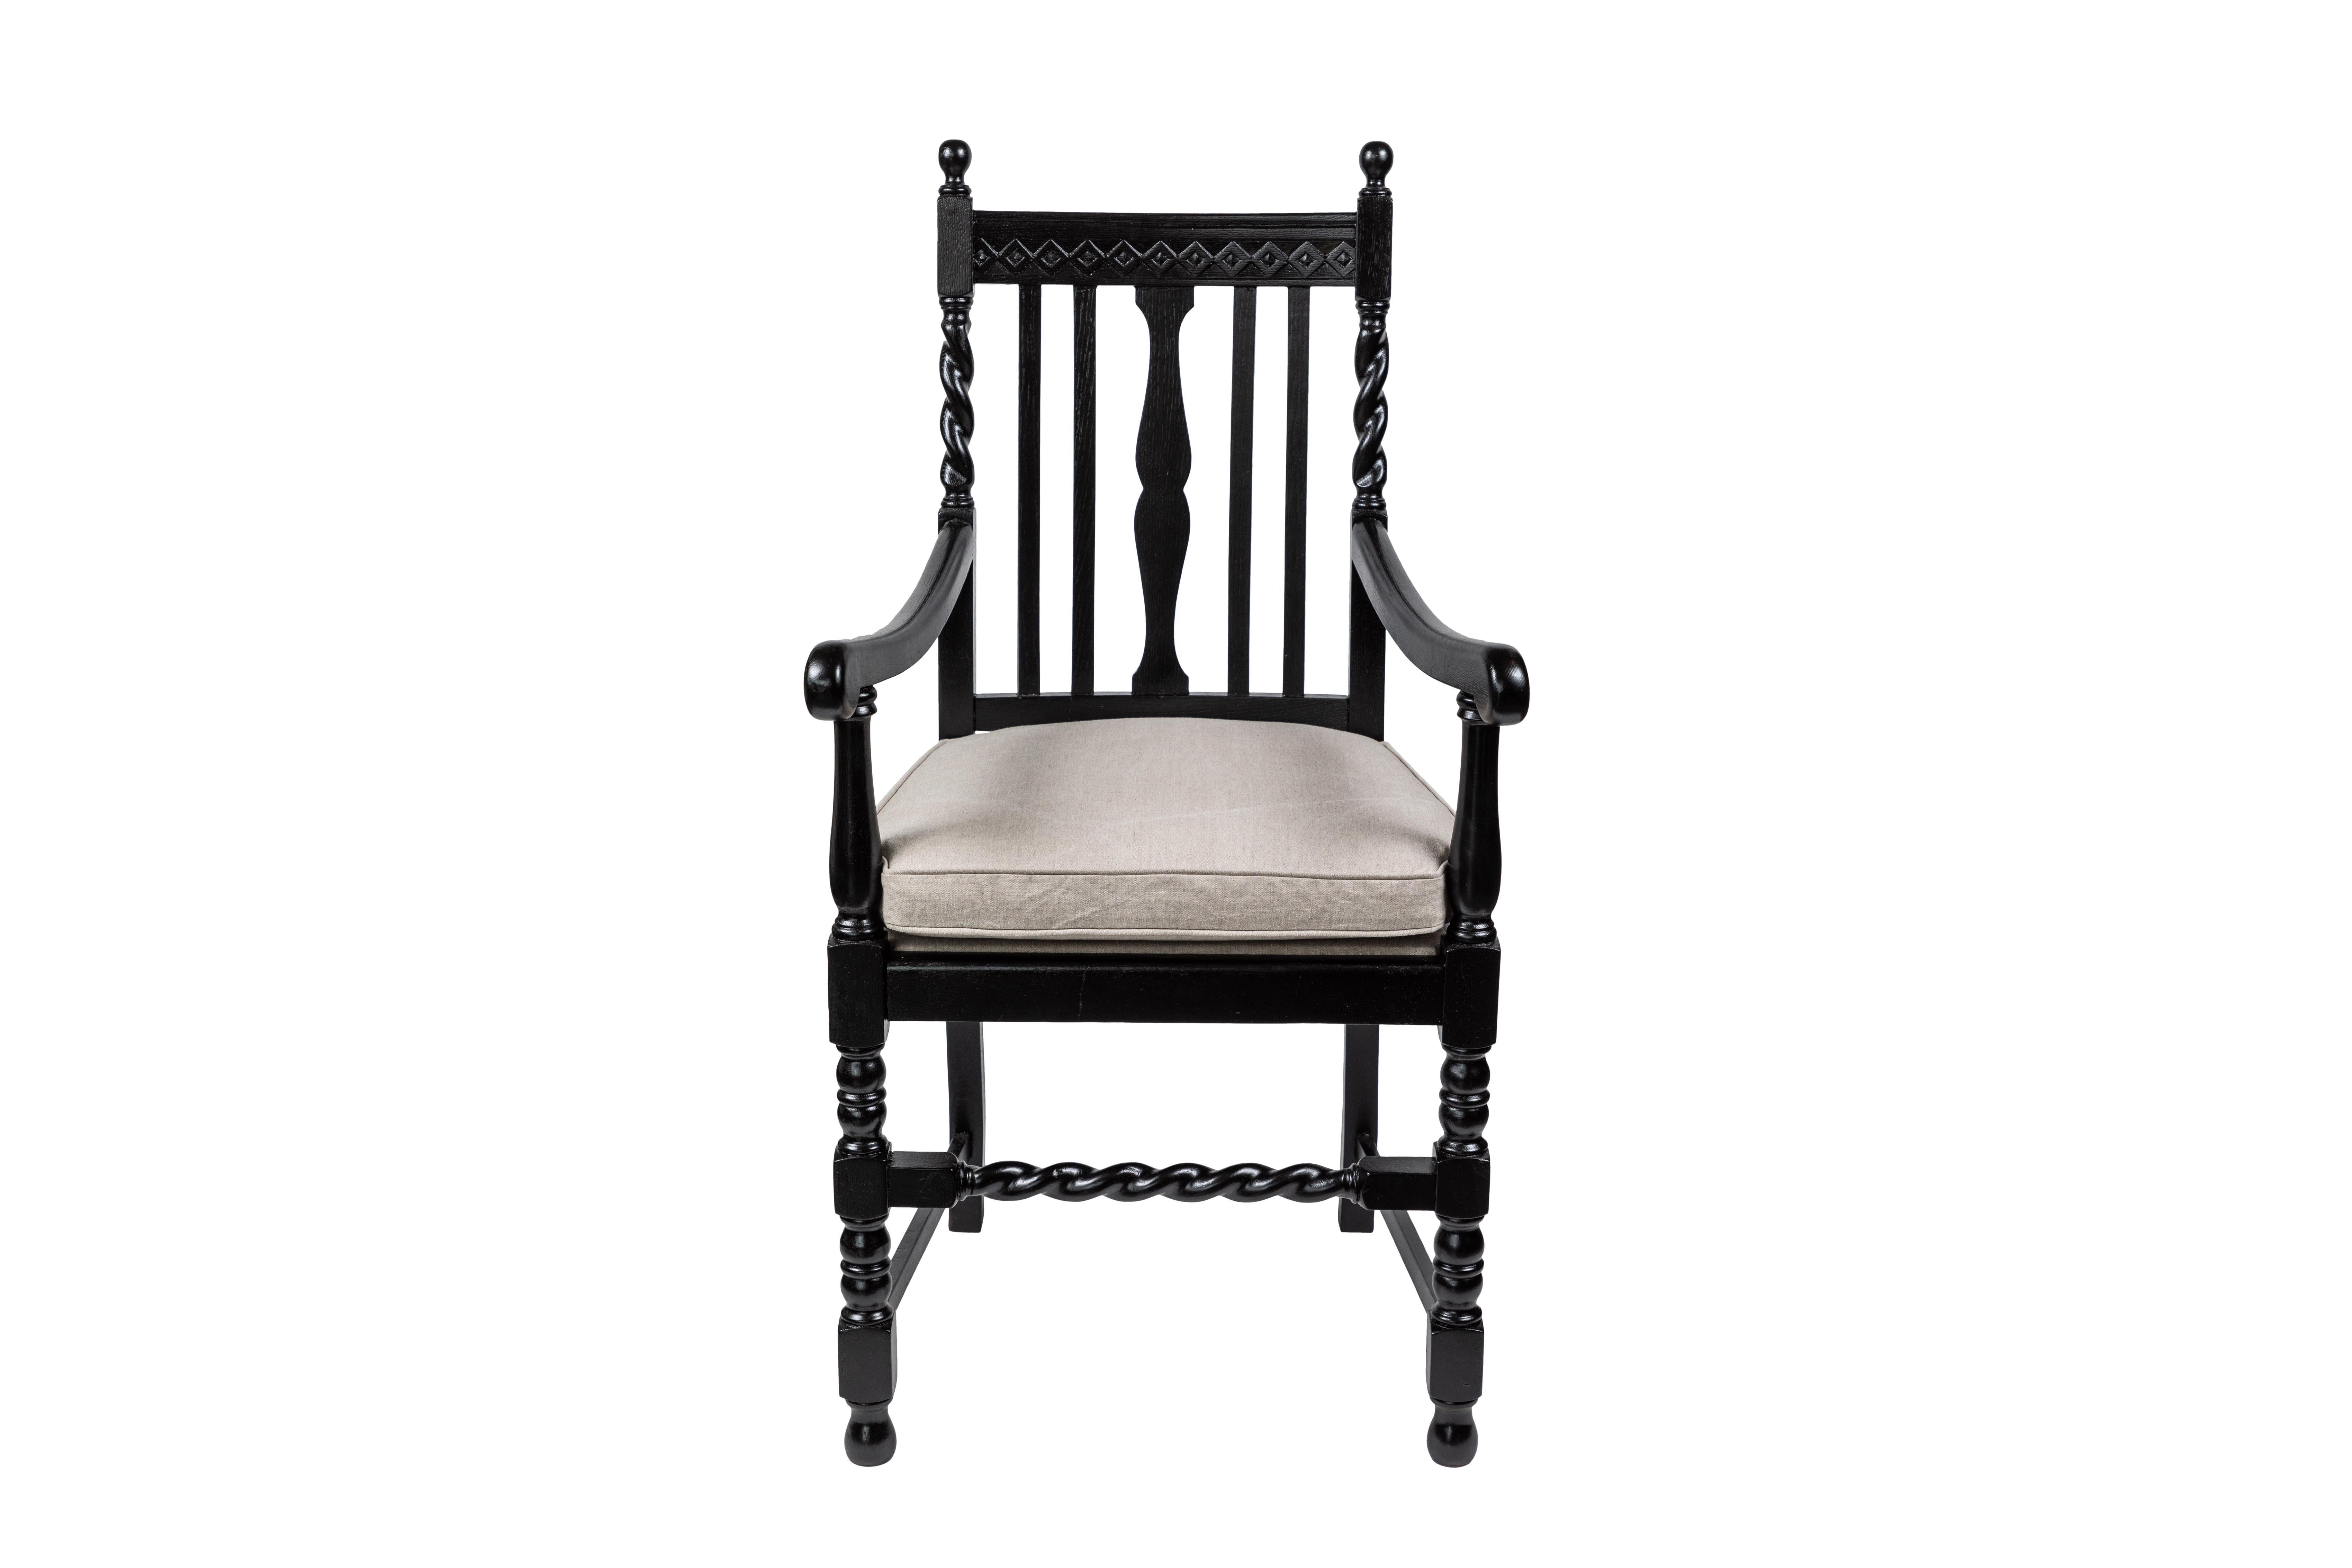 Stately antique oak armchair with slat back and turned wood detailing, has been newly repainted in a gorgeous black lacquer and the seat cushion has been reupholstered in a natural flax linen.

     